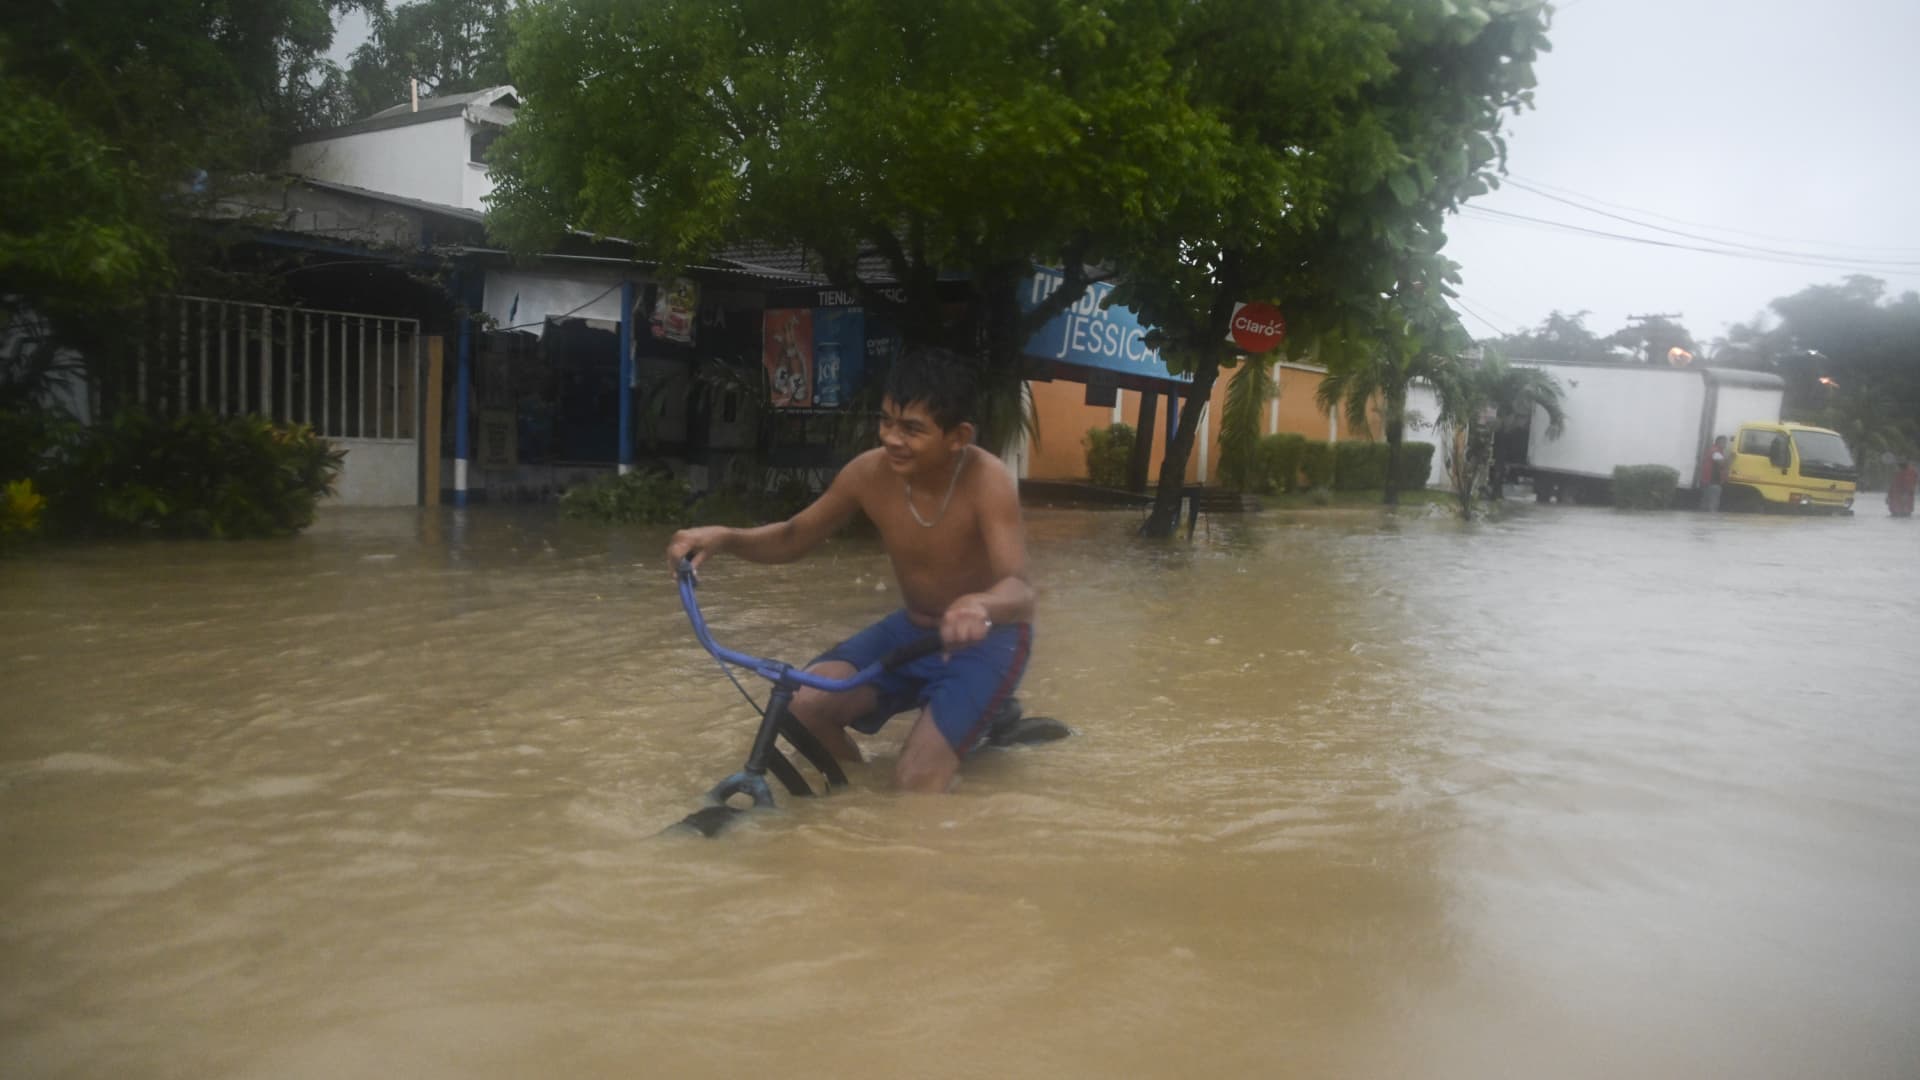 A boy rides a bicycle along a flooded street due to the heavy rains caused by Hurricane Eta, now degraded to a tropical storm, in Puerto Barrios, Izabal 310 km north Guatemala City on November 5, 2020.